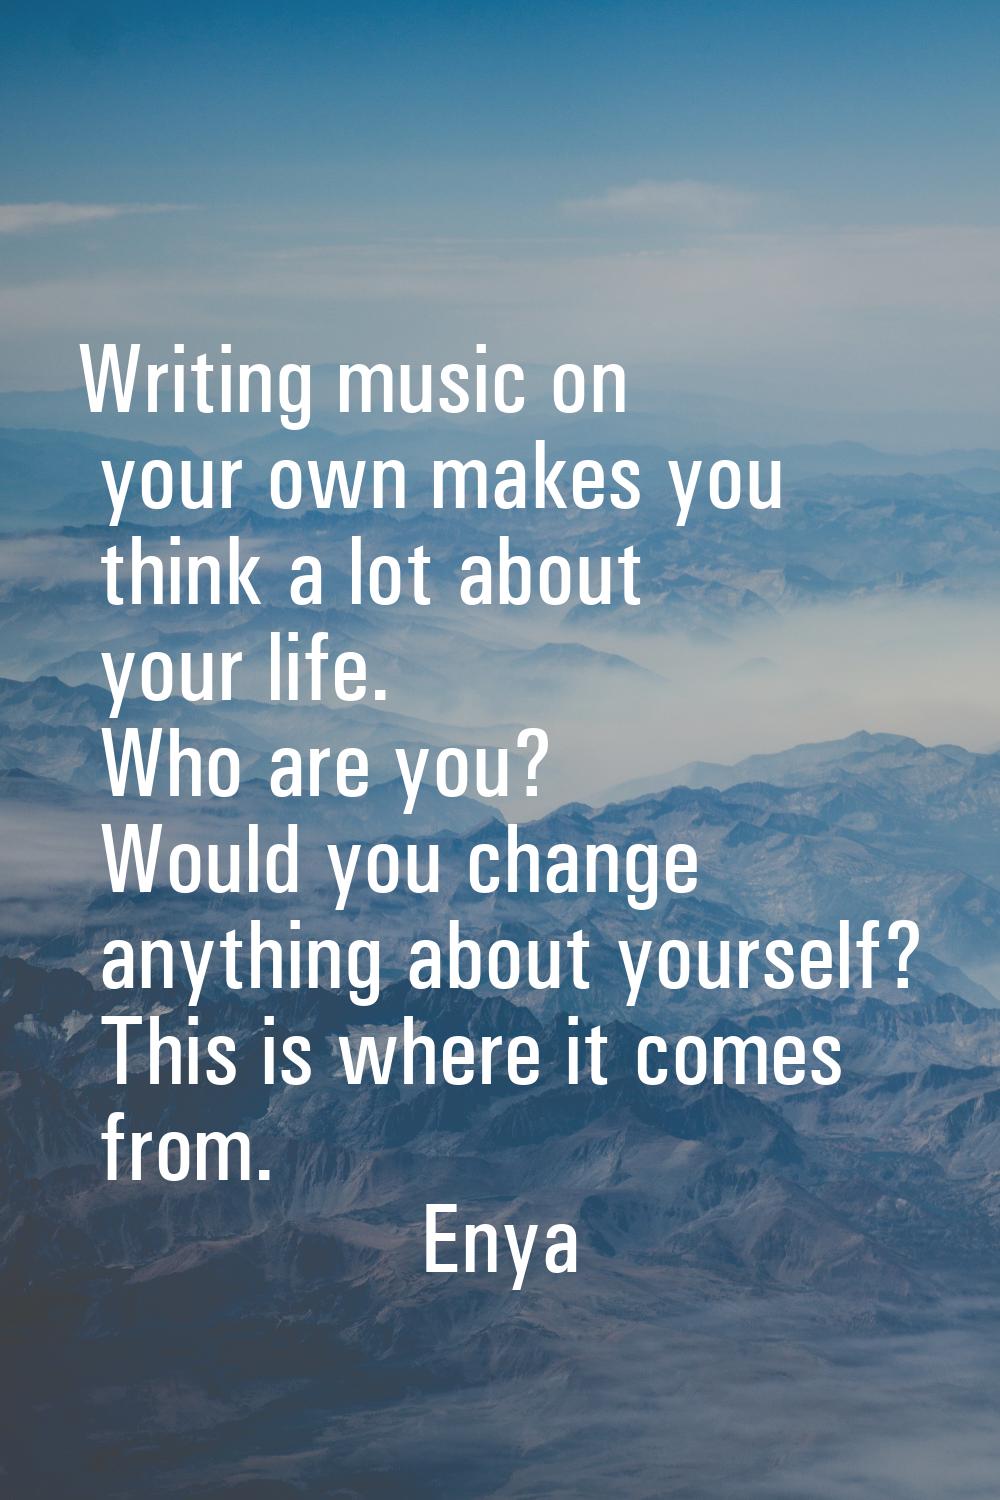 Writing music on your own makes you think a lot about your life. Who are you? Would you change anyt